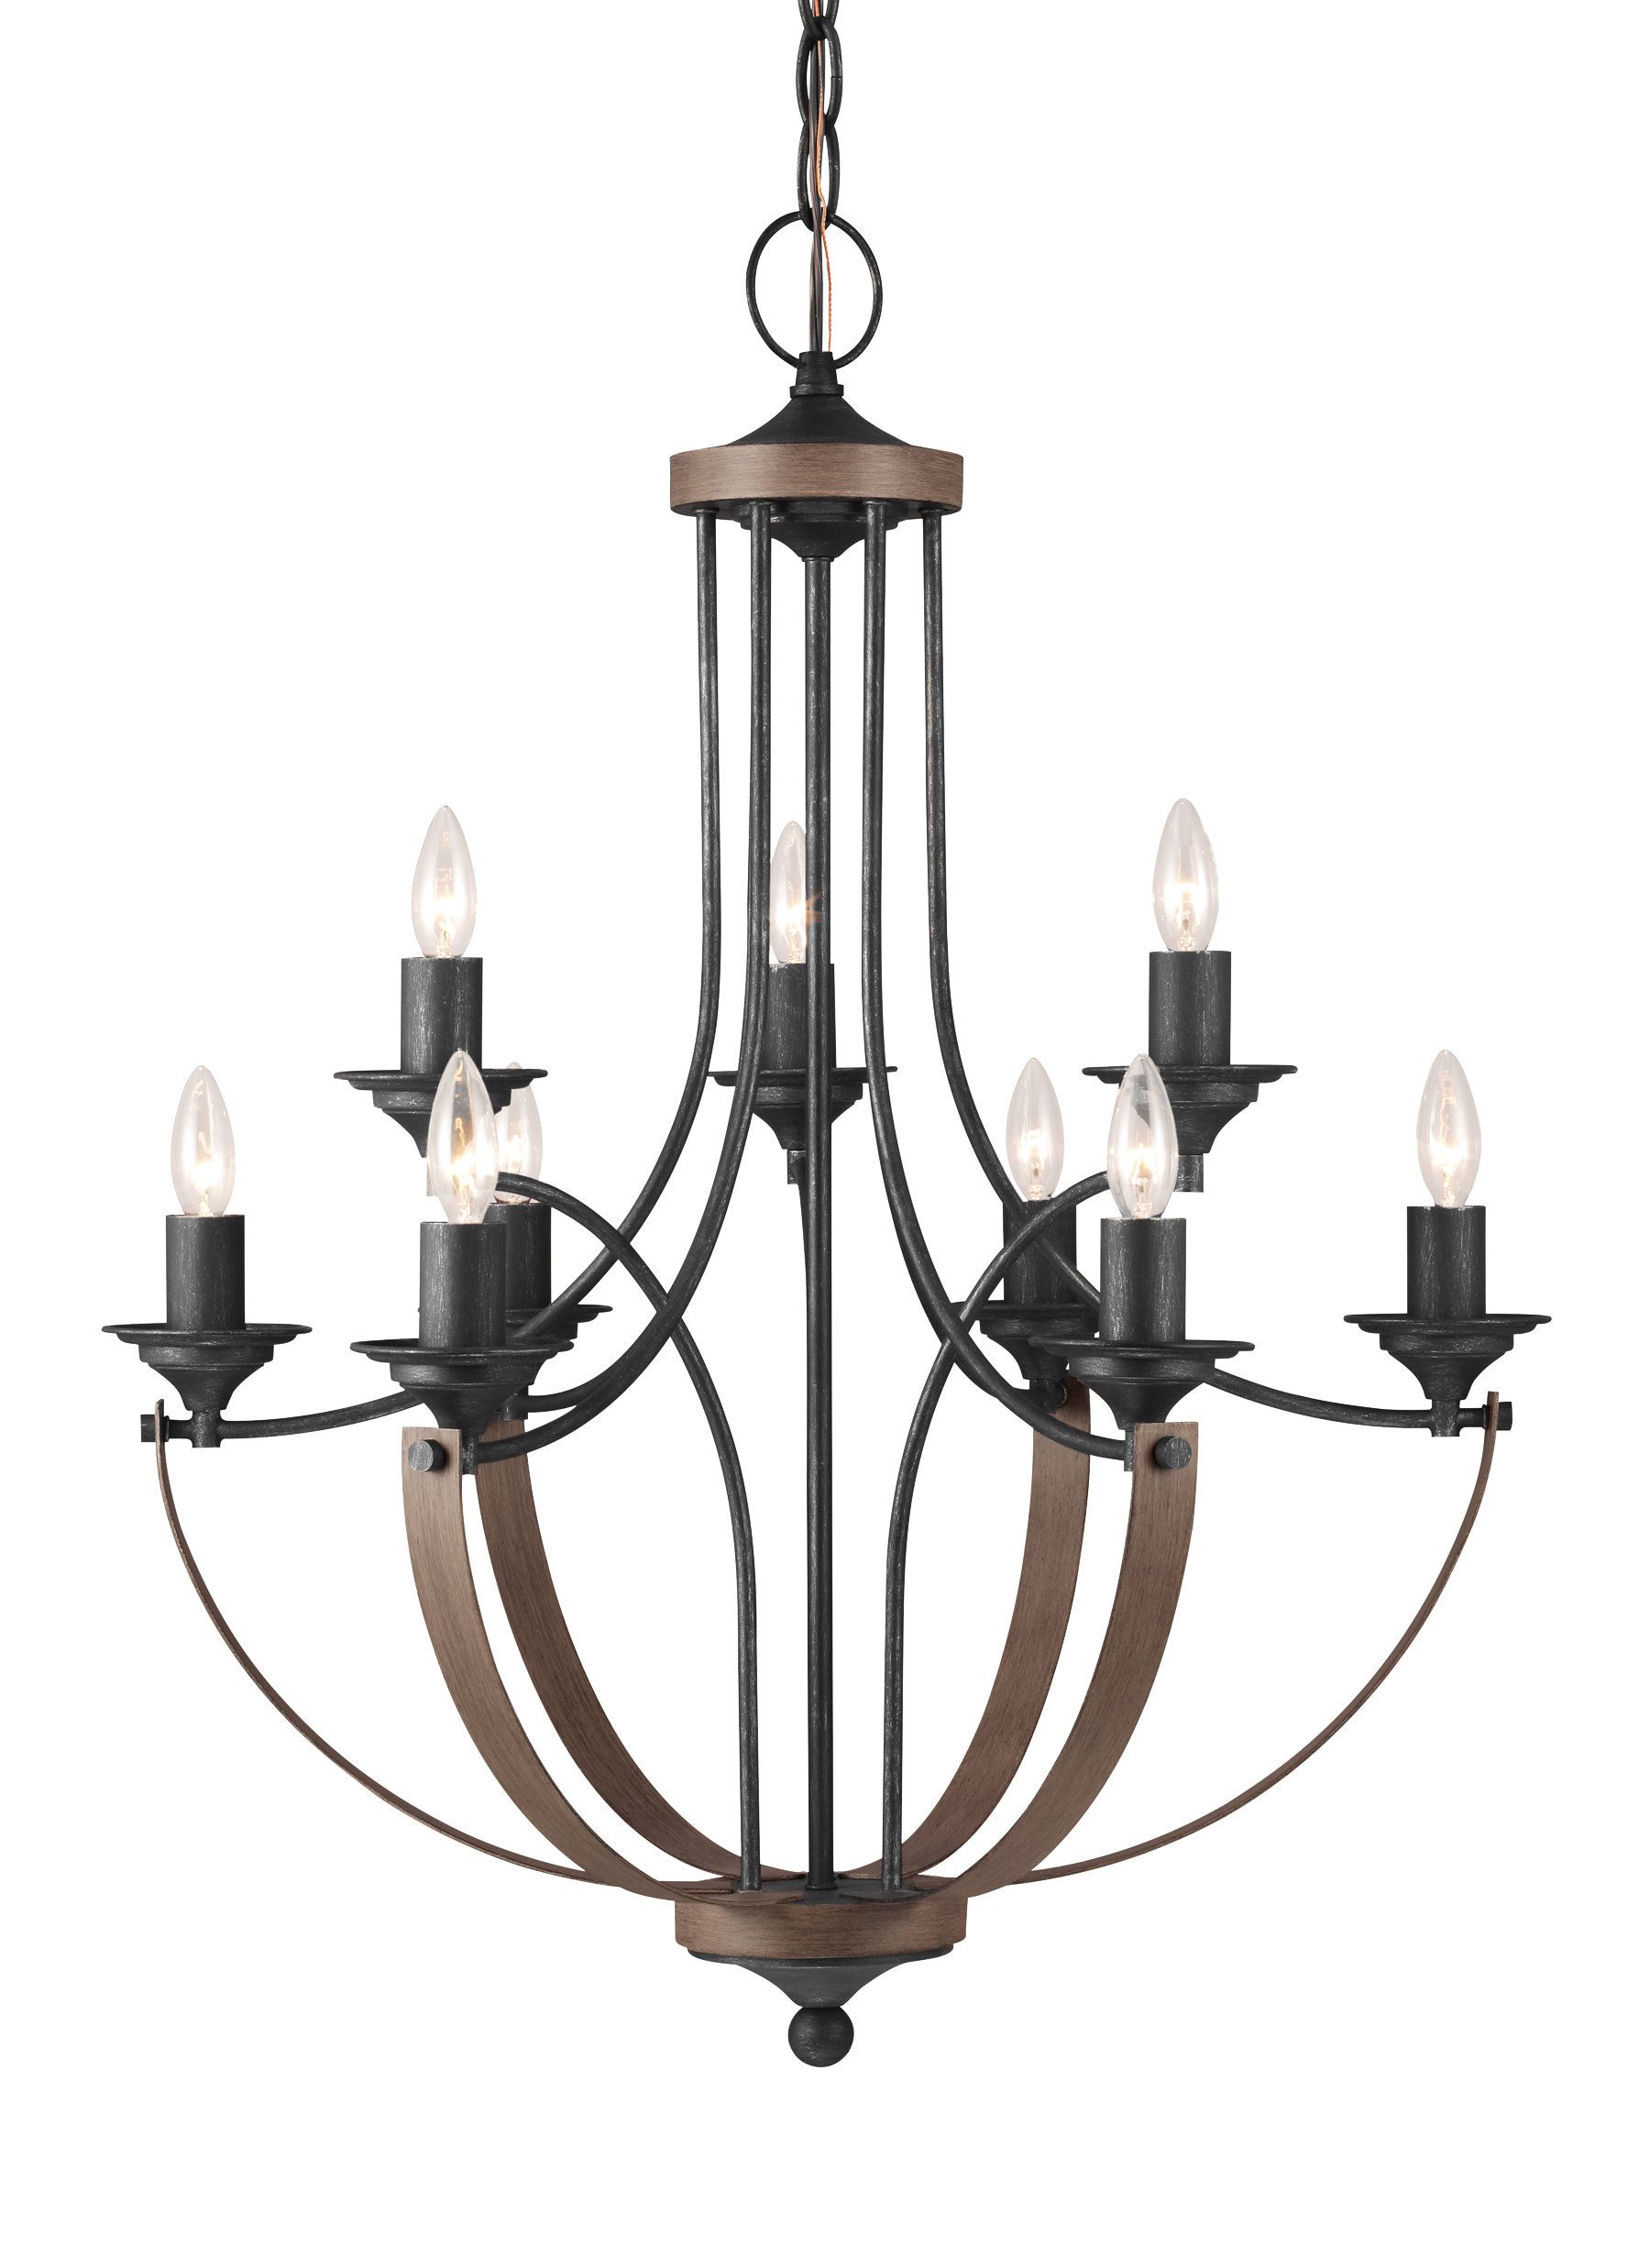 Camilla 9 Light Candle Style Chandeliers Pertaining To Most Up To Date Camilla 9 Light Candle Style Chandelier (Gallery 1 of 20)